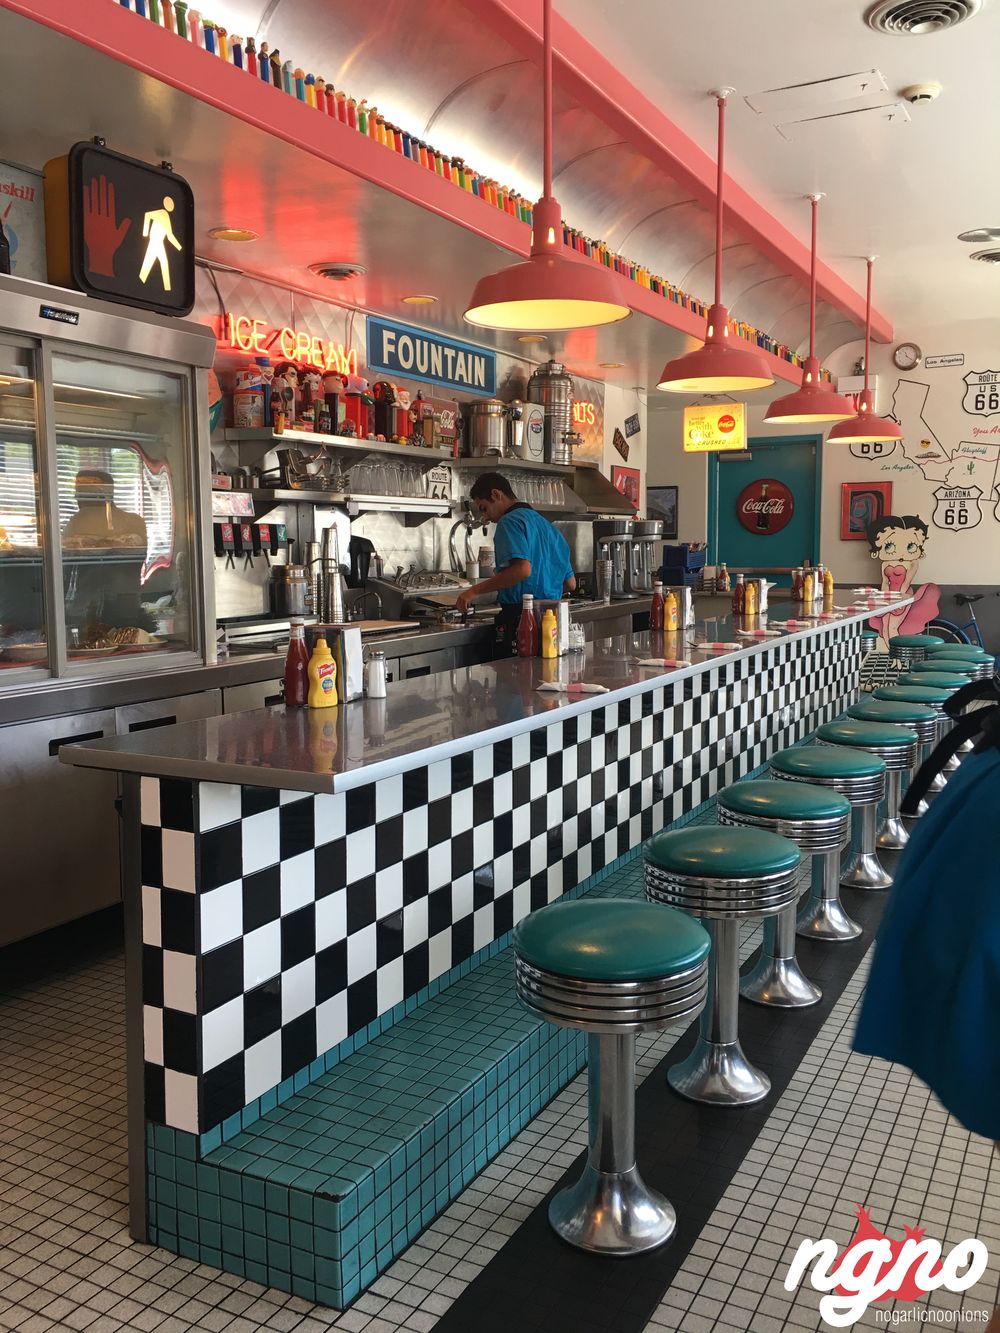 route-66-diner-new-mexico302017-03-20-10-21-02